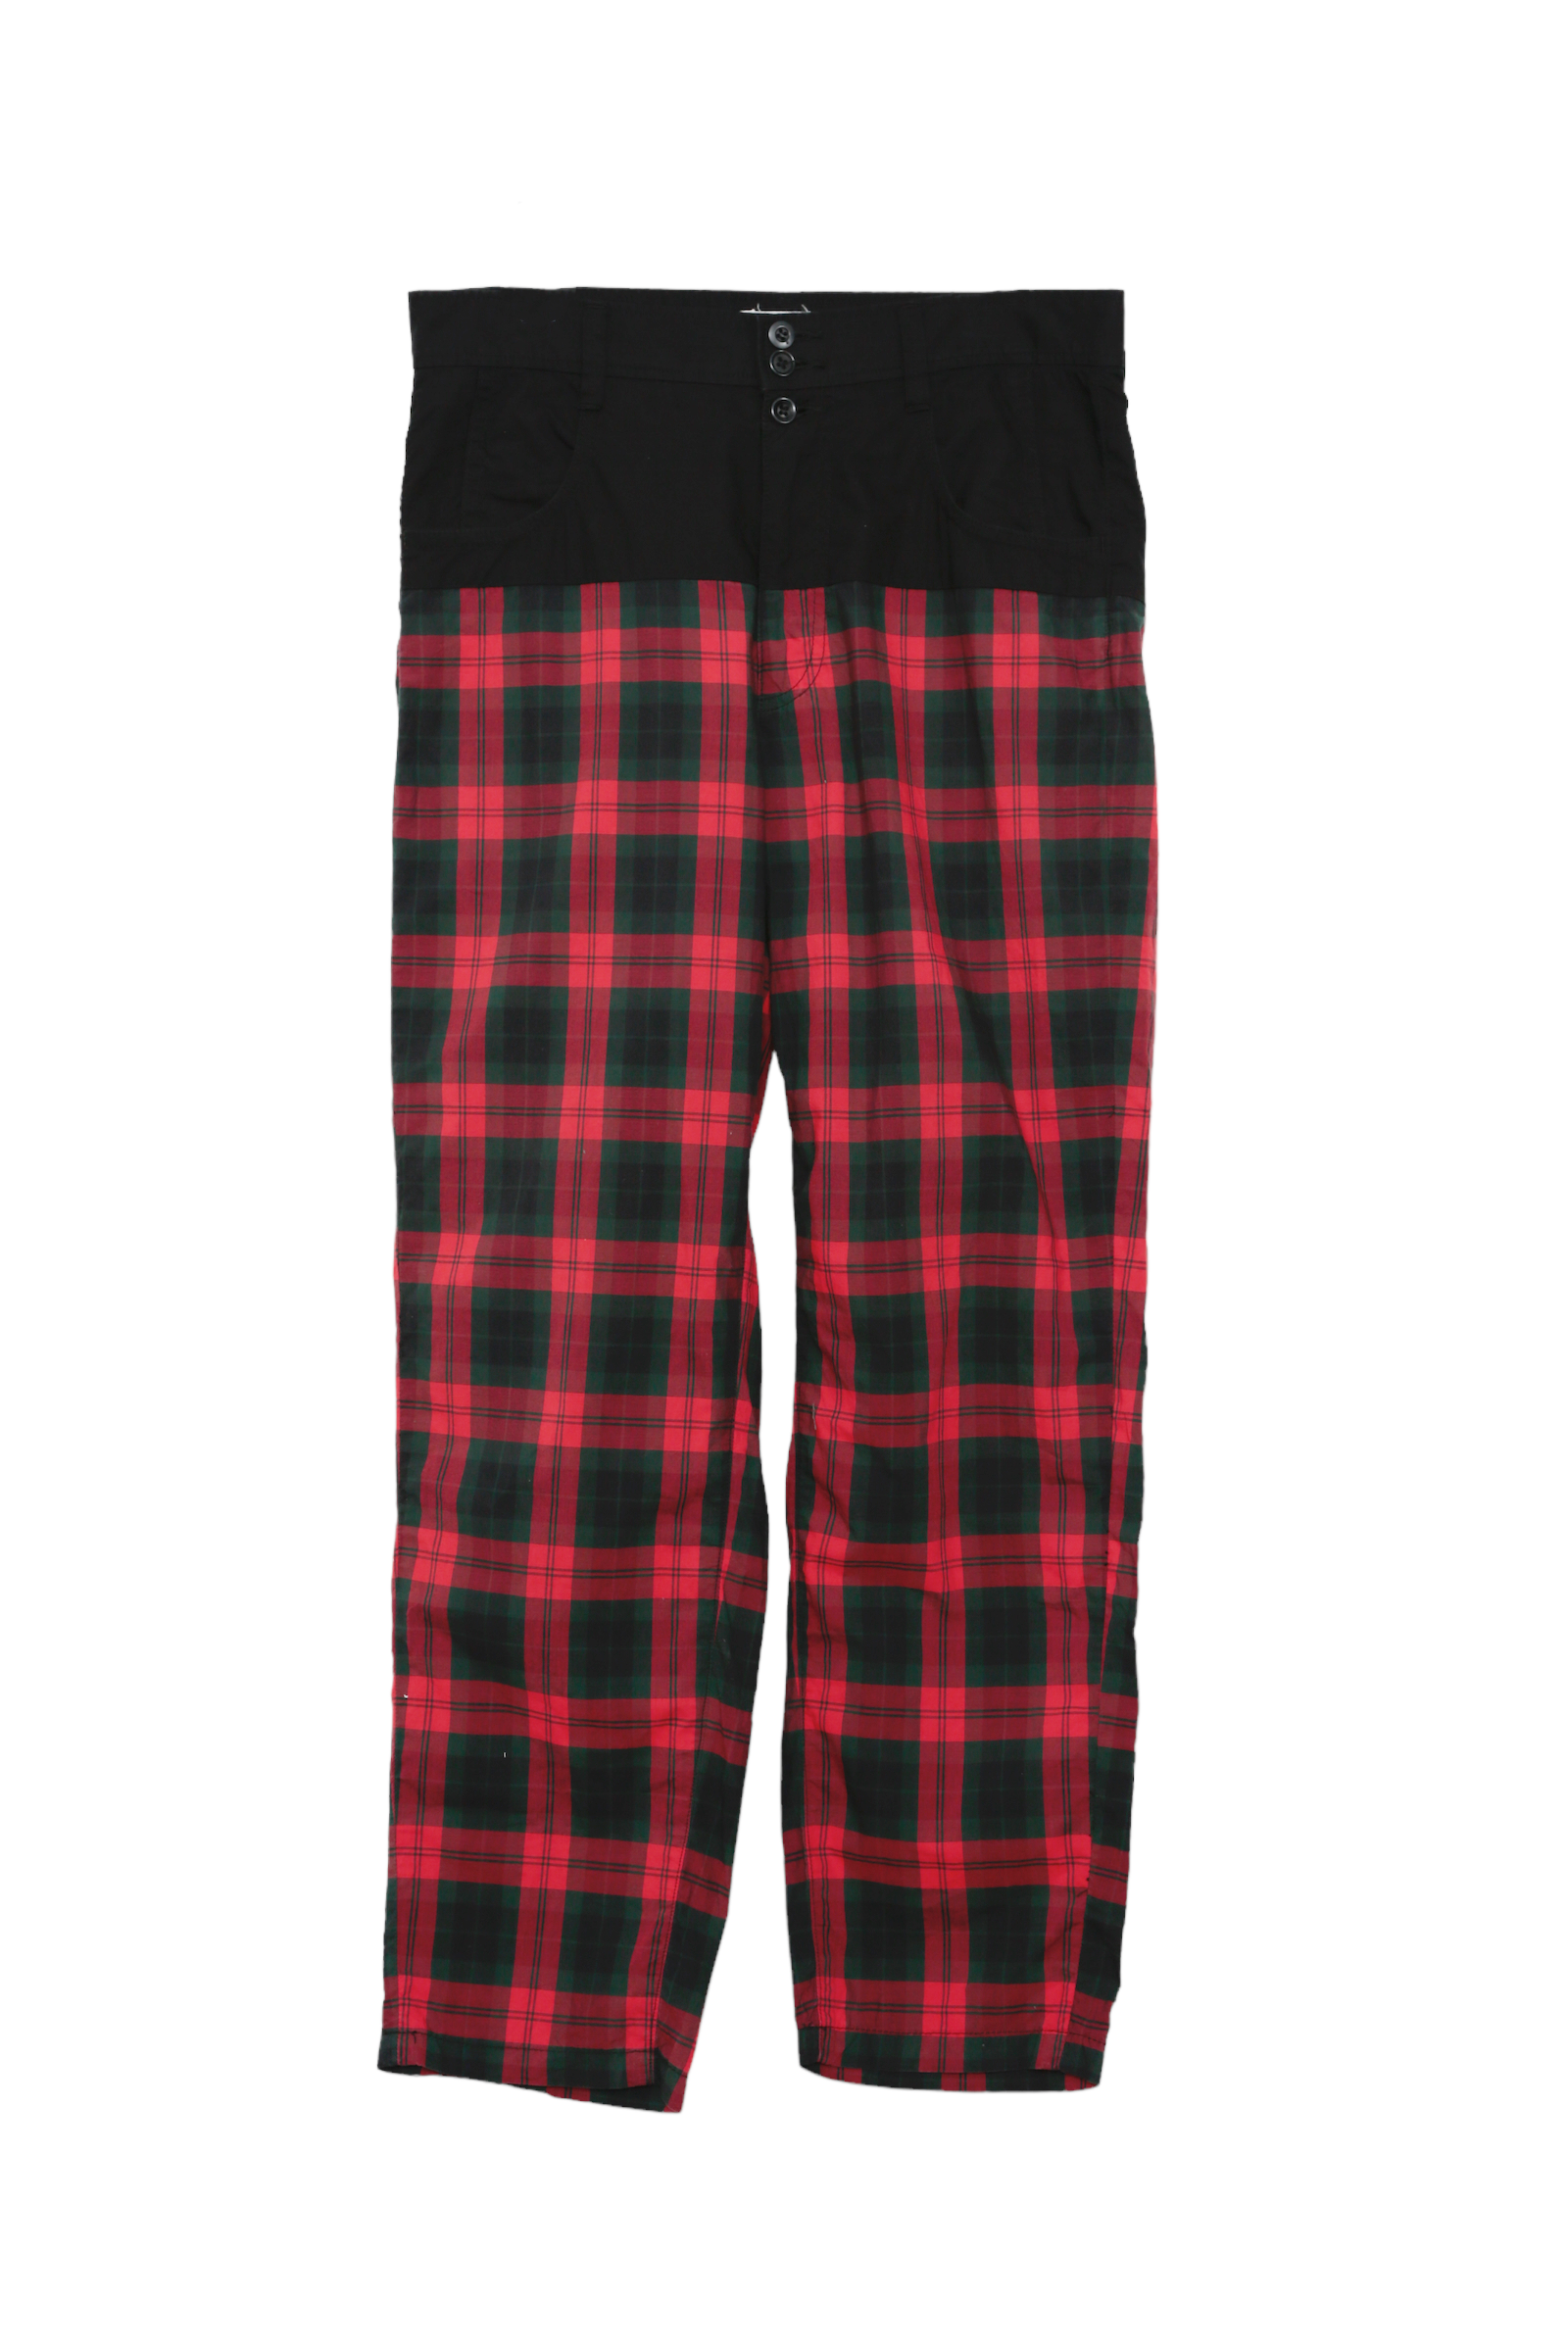 UNDERCOVERISM SWITCHING CHECKER PANTS